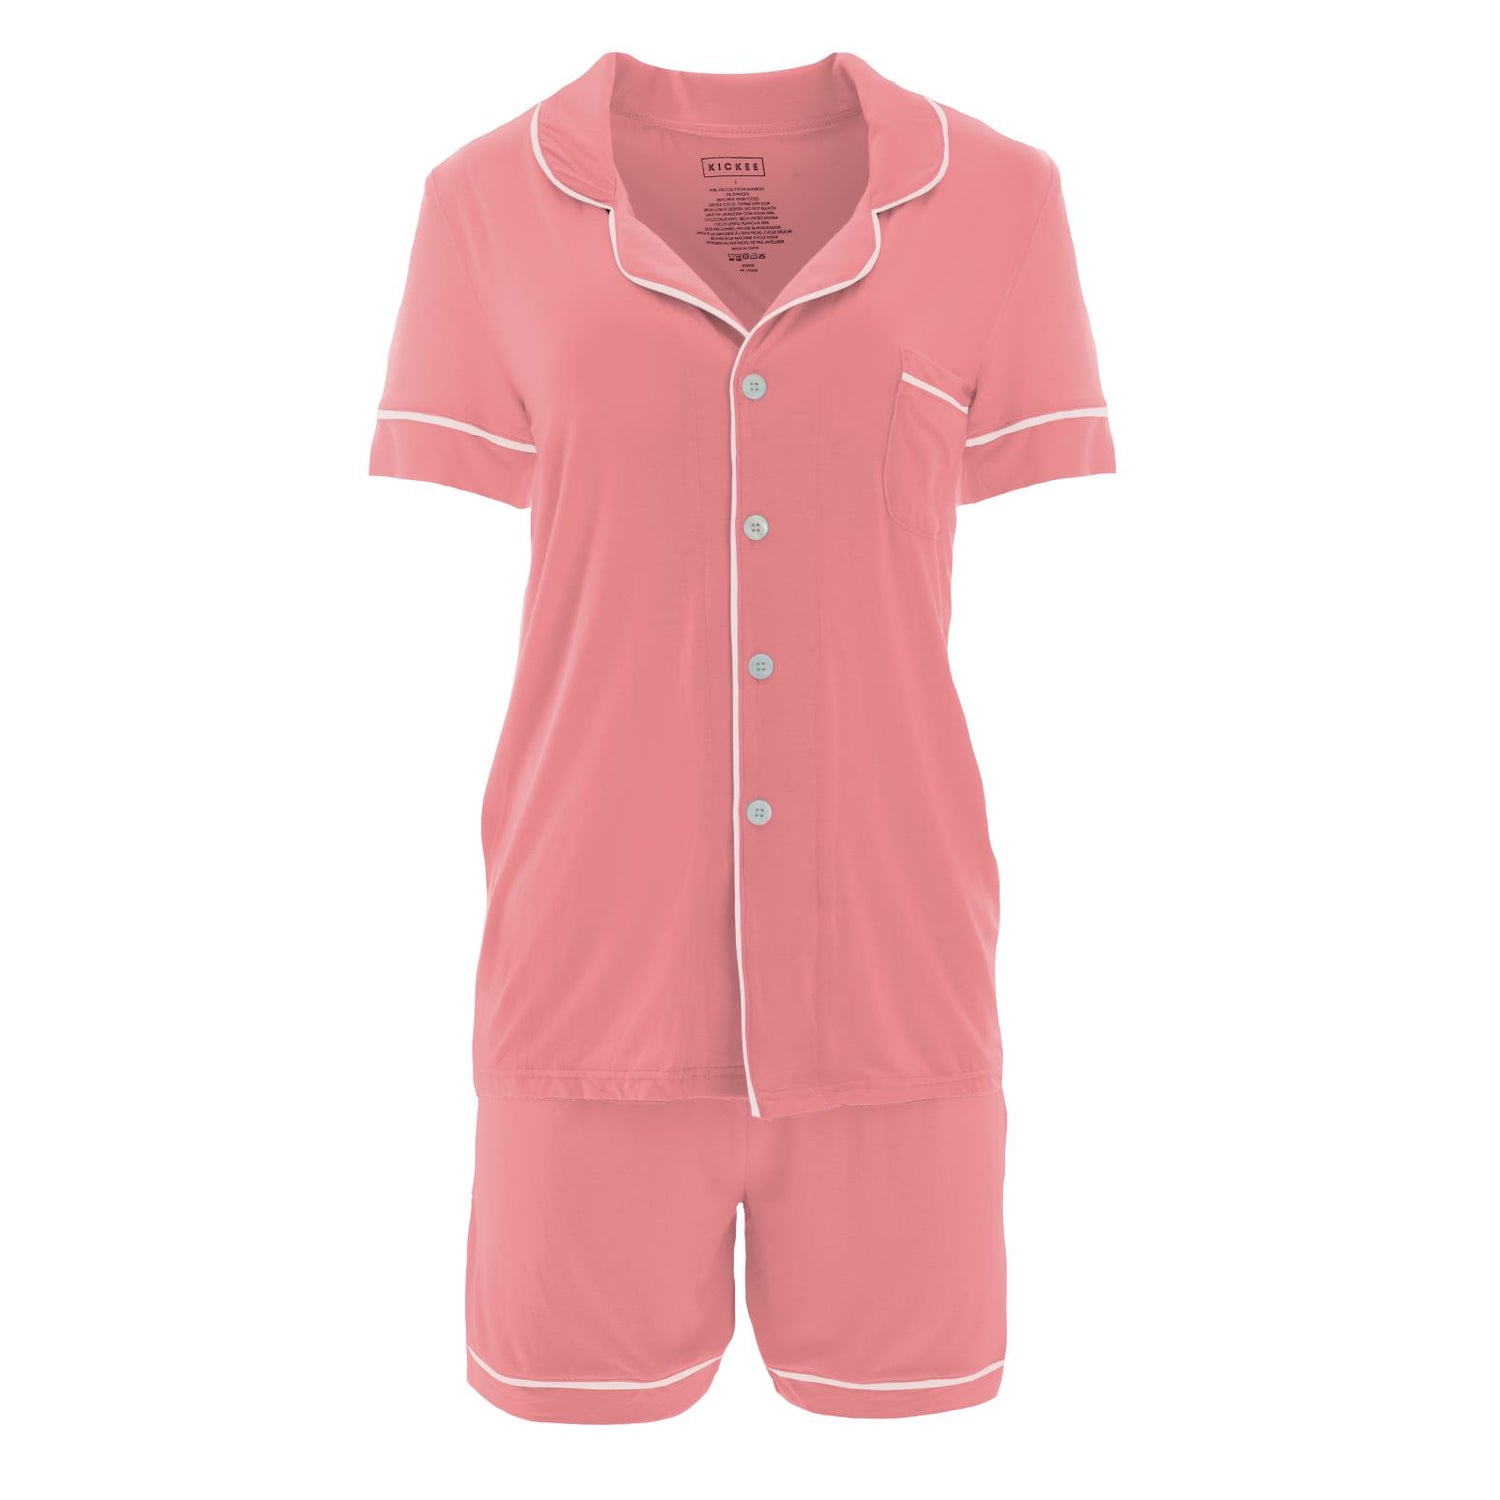 Women's Short Sleeve Collared Pajama Set with Shorts in Strawberry with Macaroon